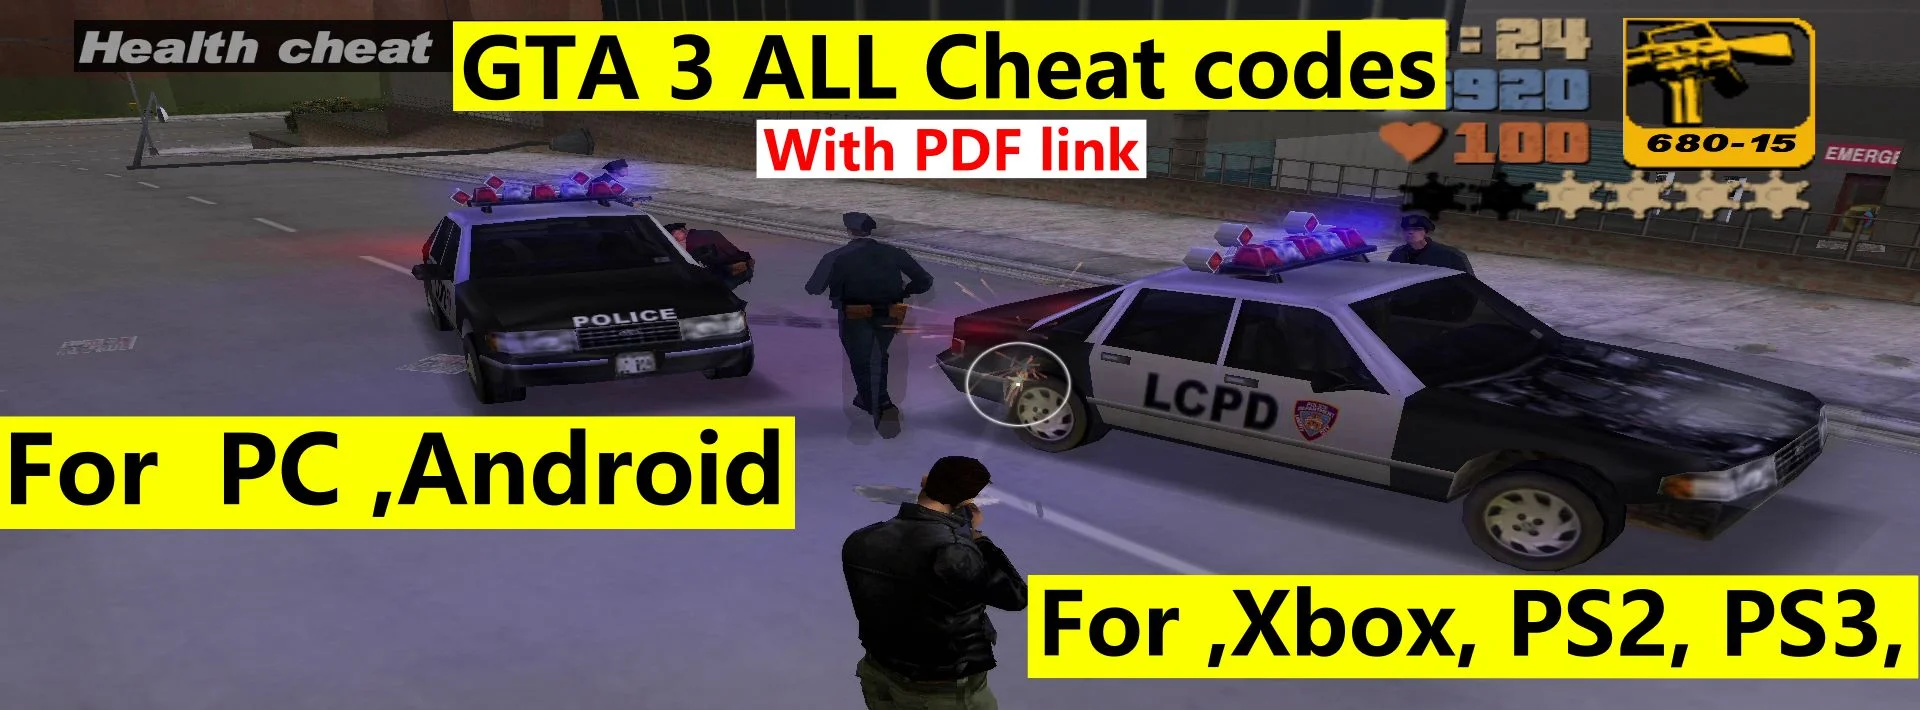 Complete list of GTA Cheat Codes for PS2, PS3, PC & Android